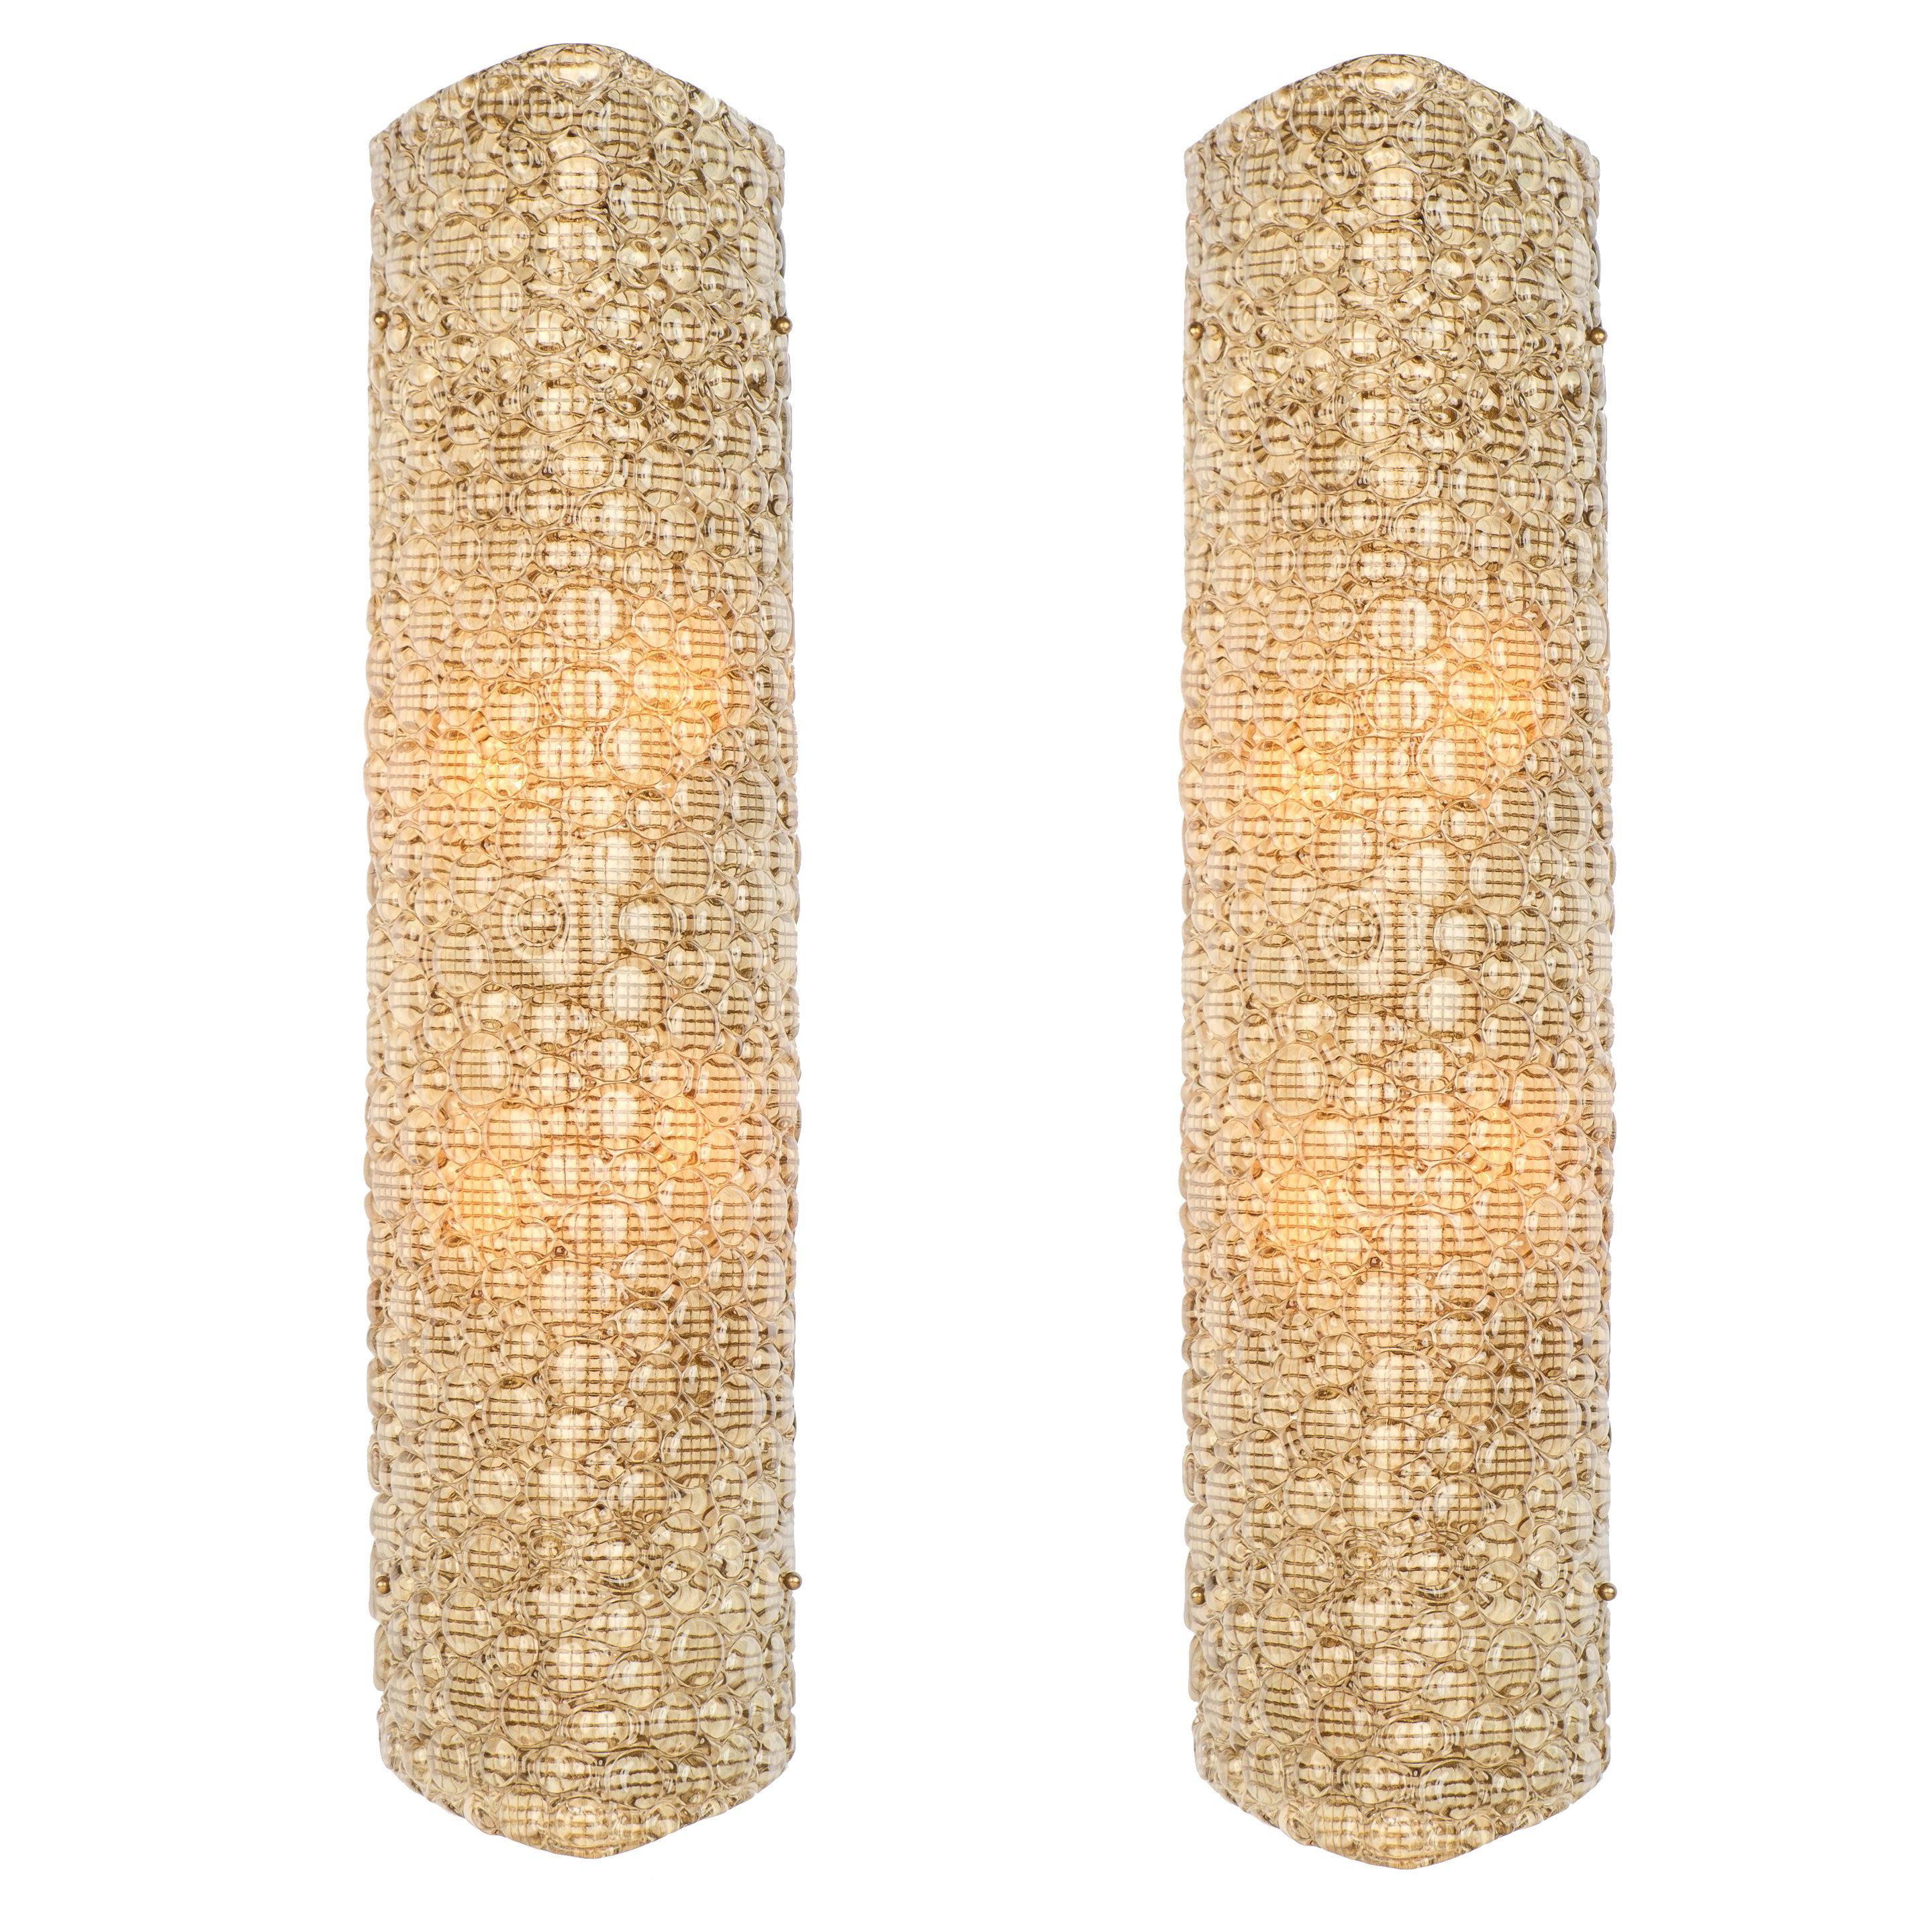 Pair of Large Murano Glass Wall Sconces